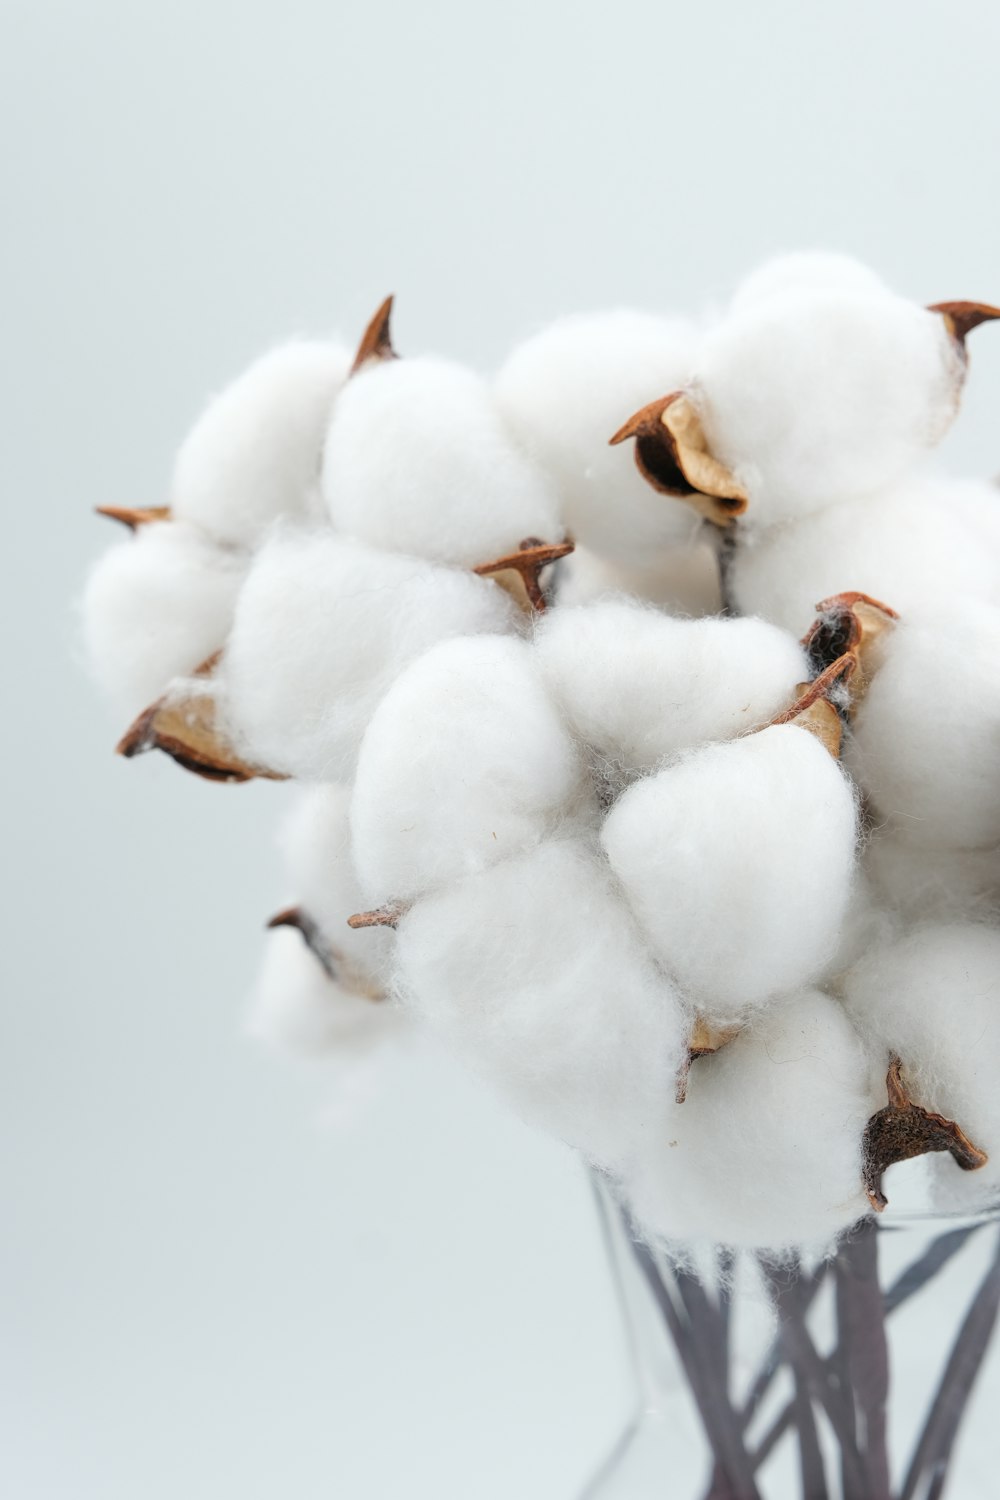 a bunch of cotton in a glass vase